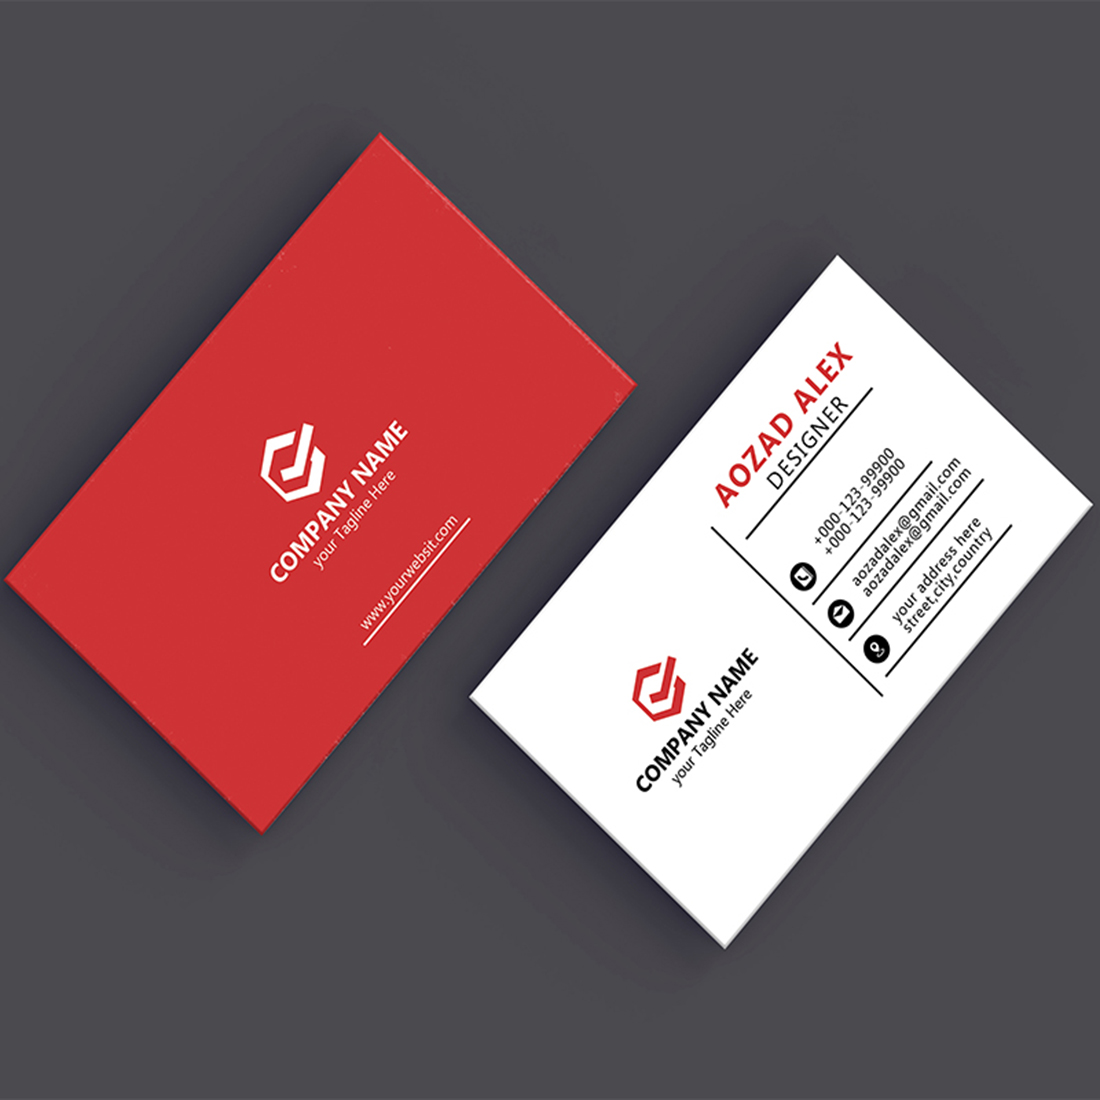 Modern Business Cared Design template 3 item included preview image.